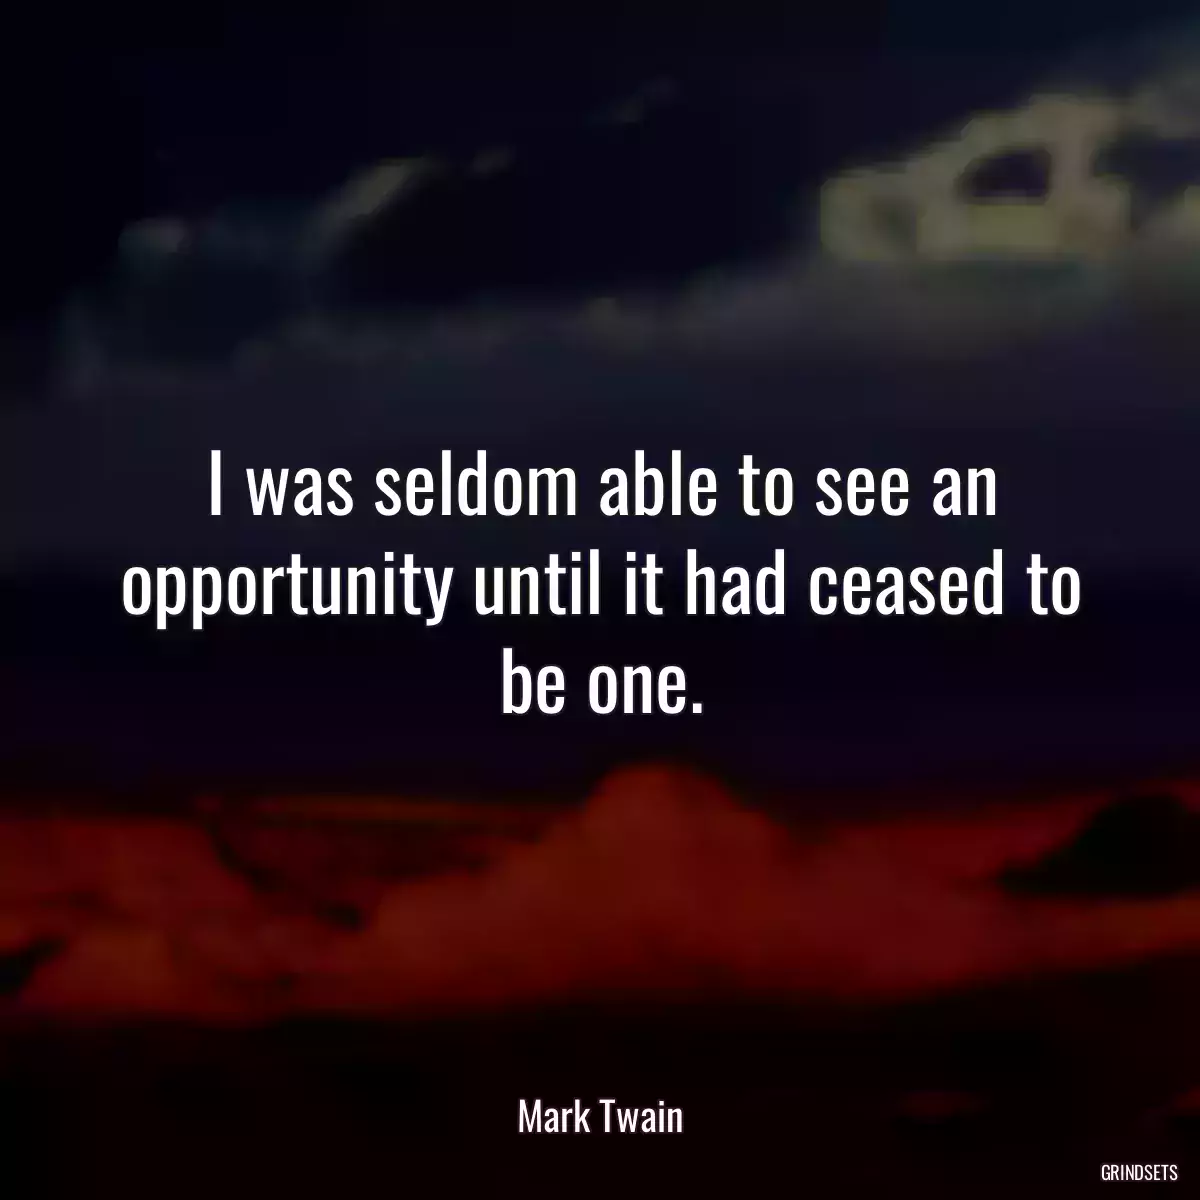 I was seldom able to see an opportunity until it had ceased to be one.